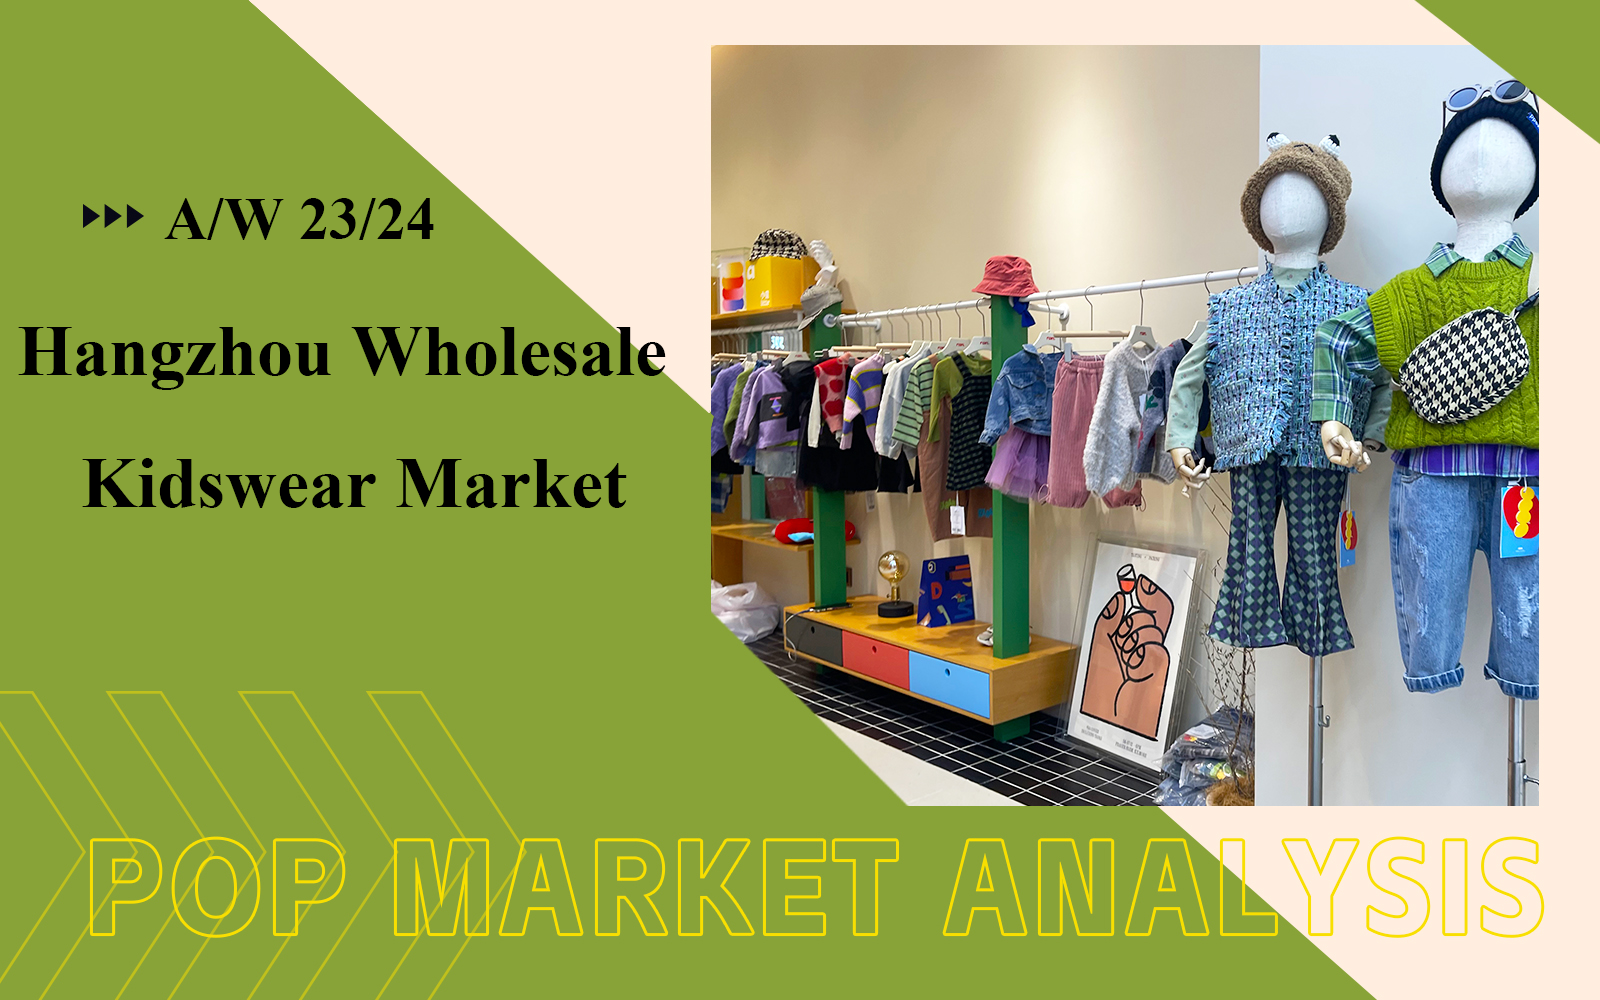 Analysis of Hangzhou Wholesale Market for Children's Clothing in October